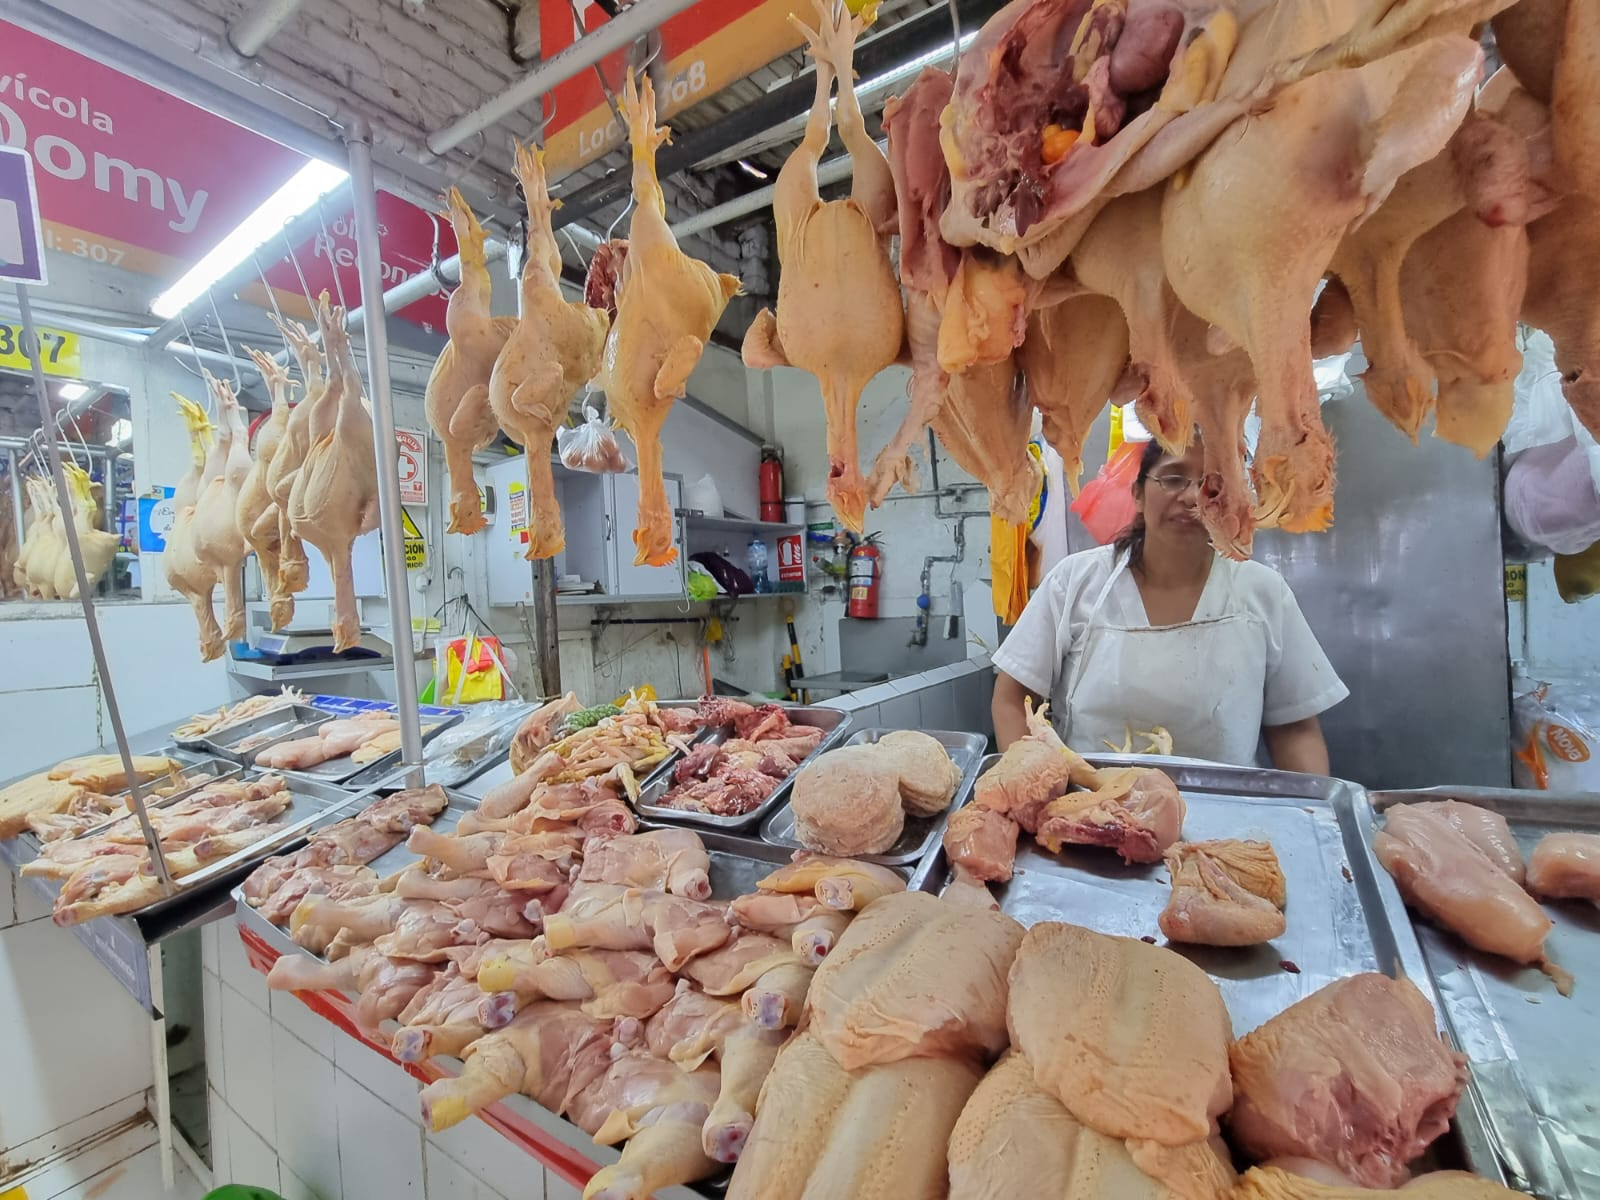 Chicken sells for up to S/13.5 per kg in Lima markets